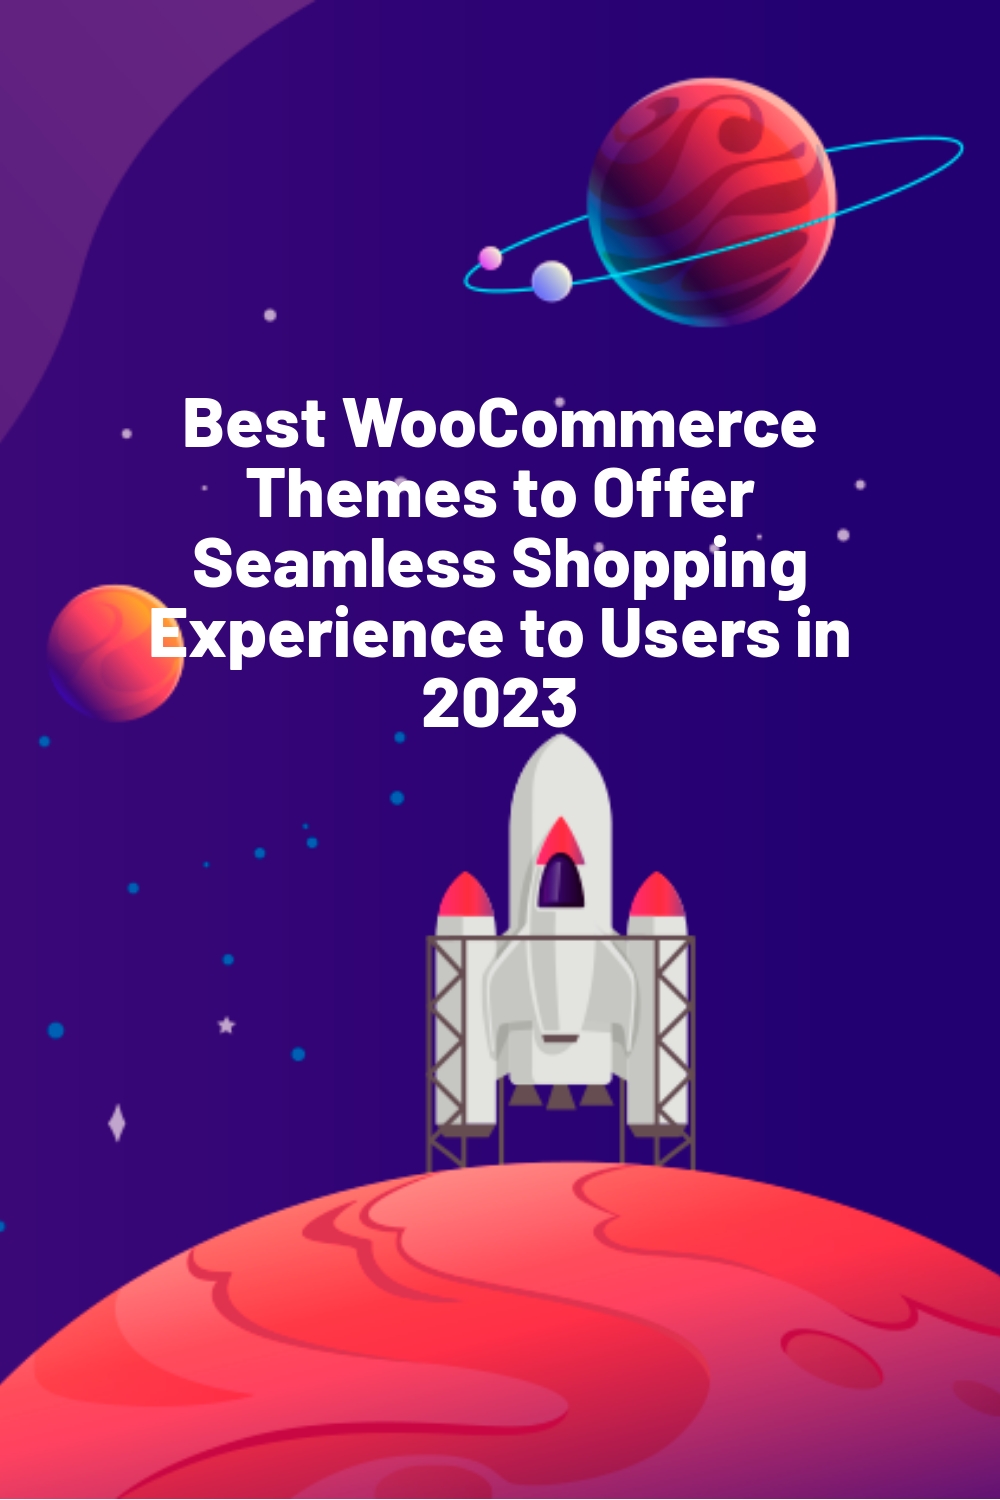 Best WooCommerce Themes to Offer Seamless Shopping Experience to Users in 2023